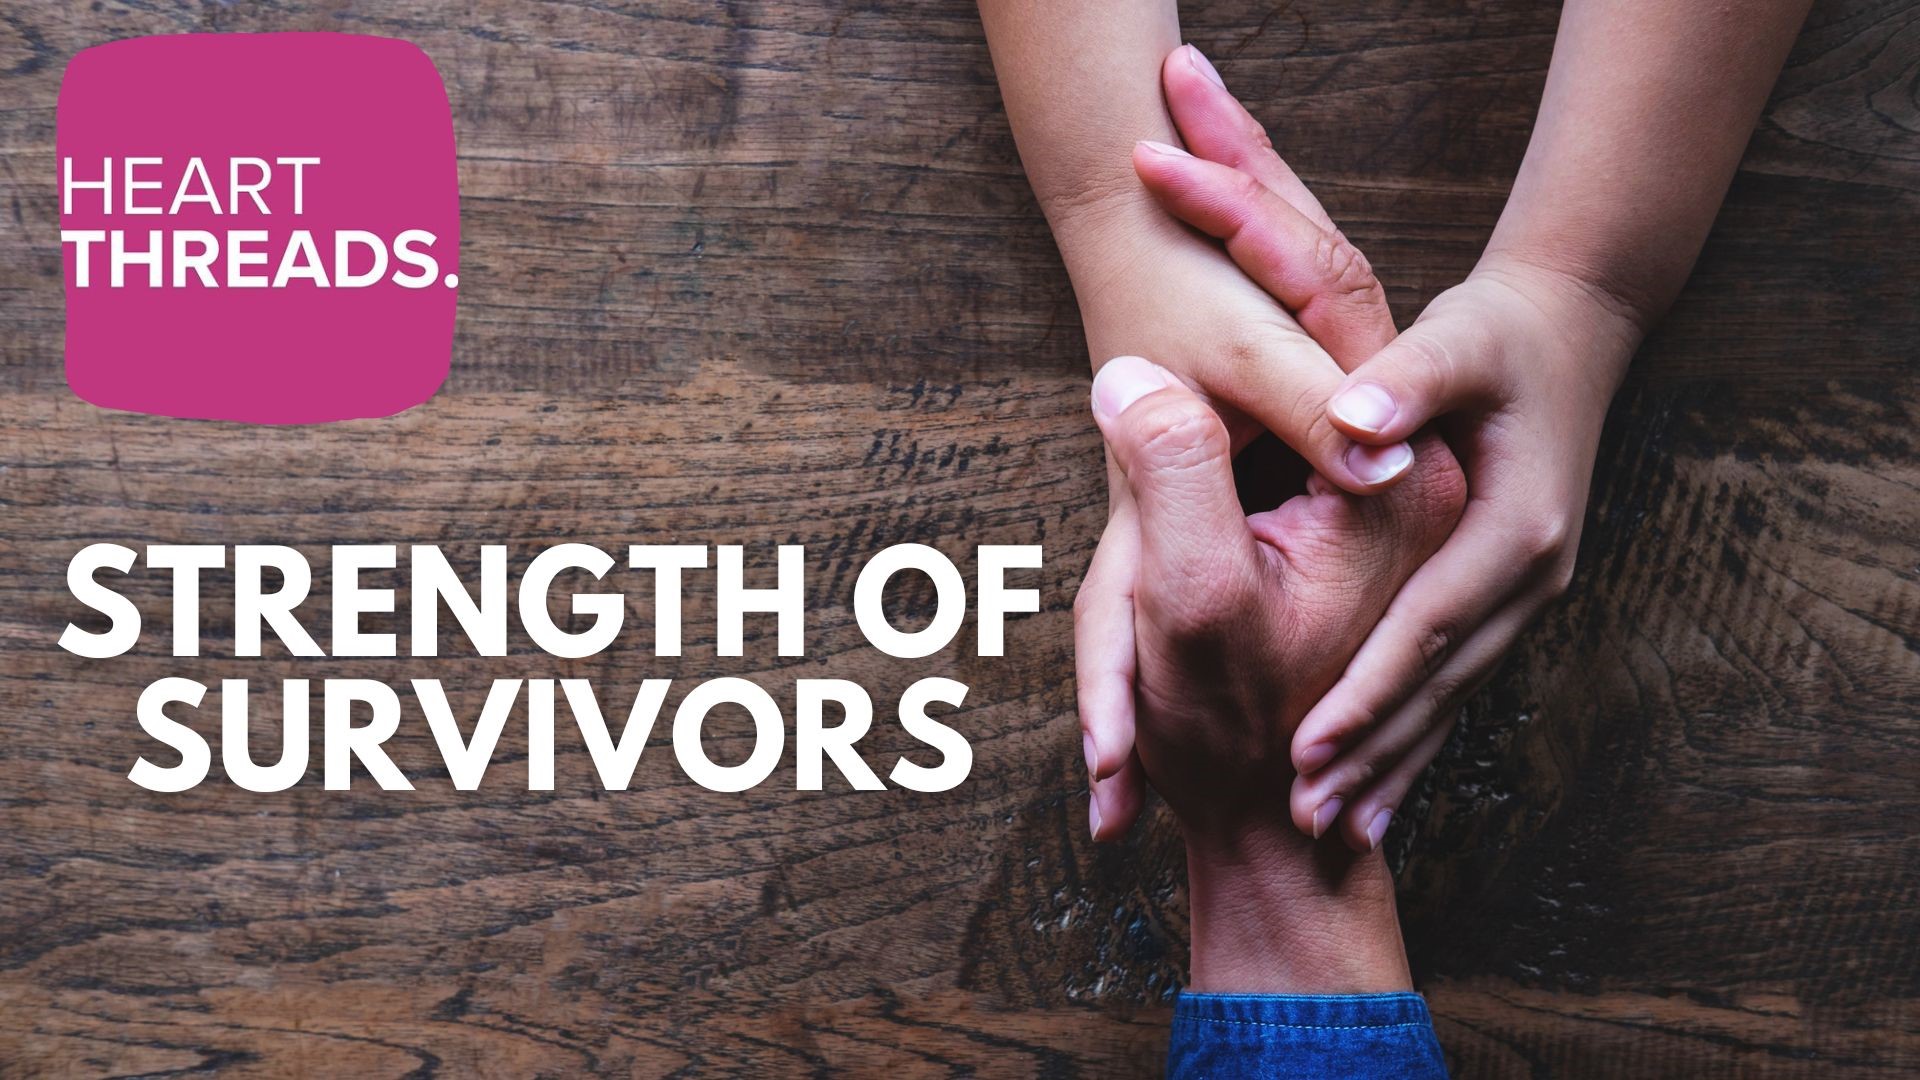 Heartwarming stories showcasing the resilience and strength of survivors of all kinds. How these individuals are overcoming the challenges thrown their way.